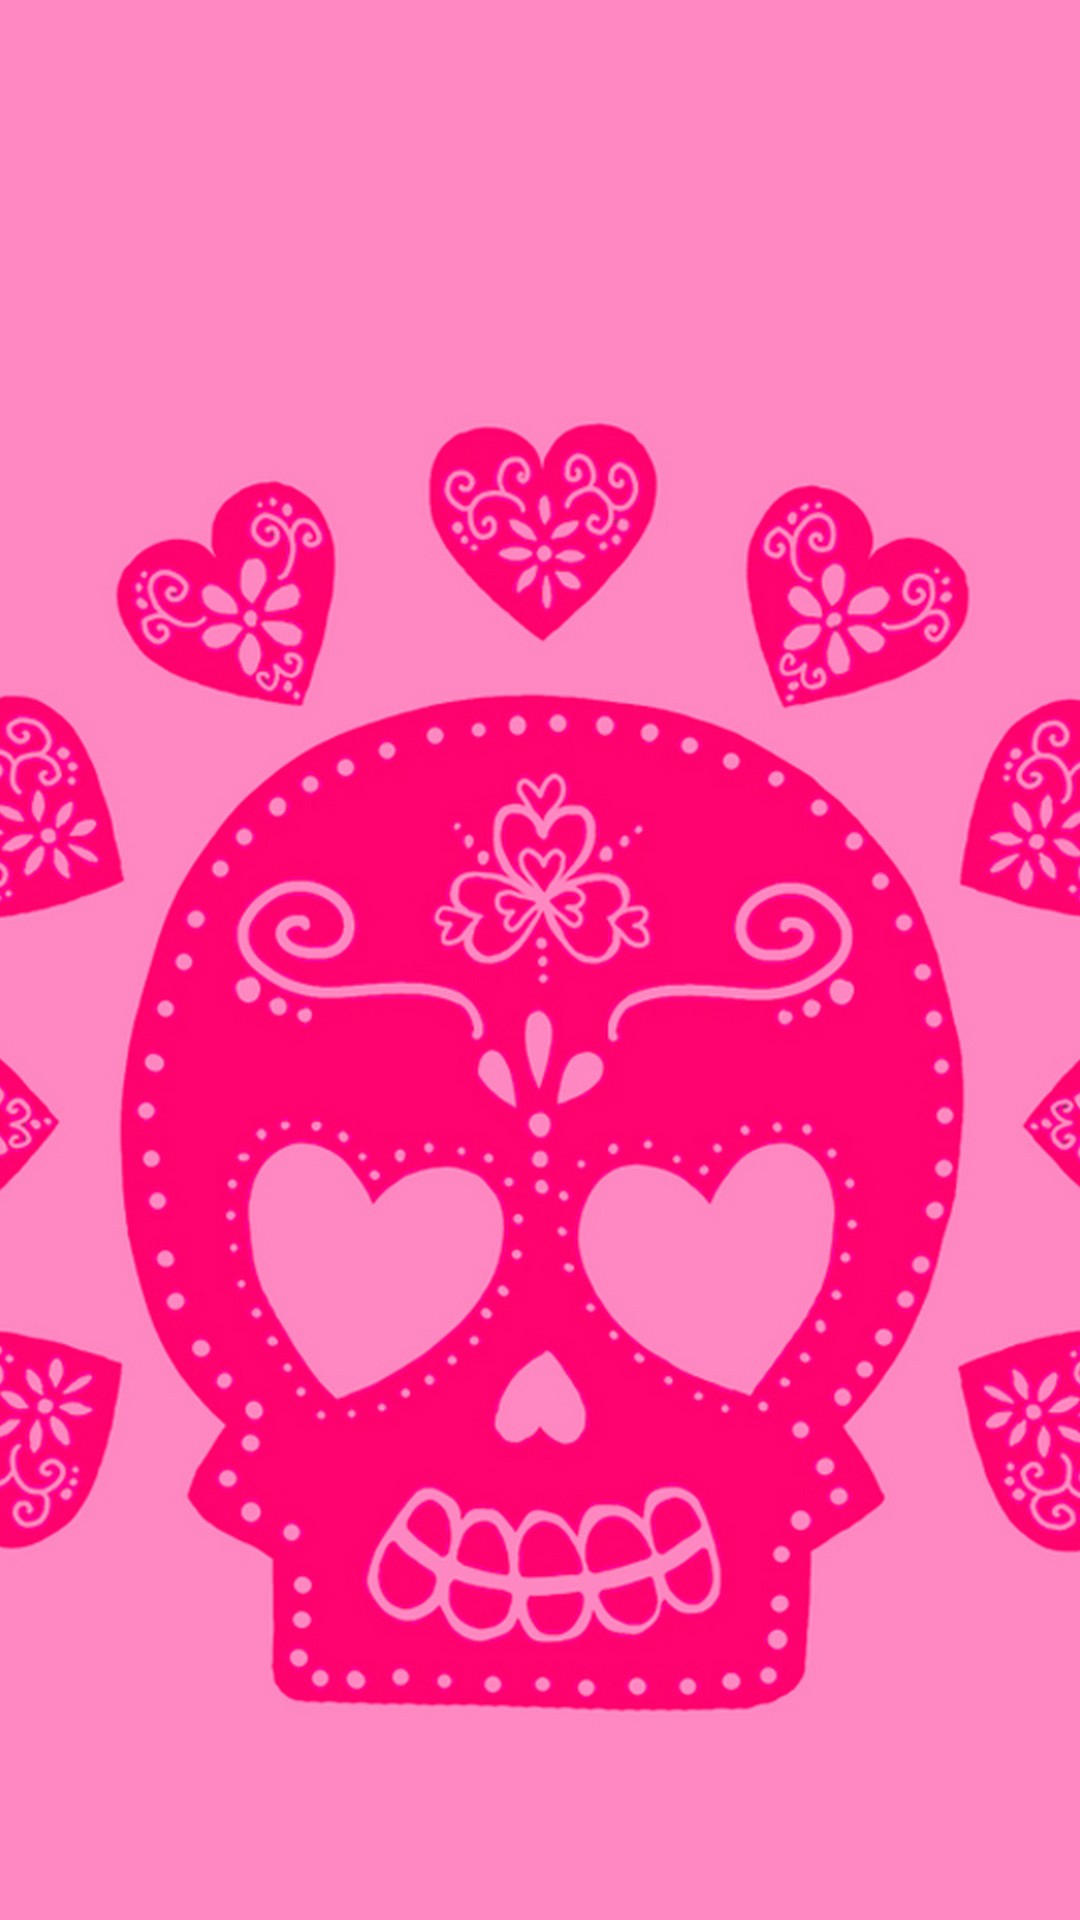 Skull Cute Girly Wallpaper Android - Southwold Pier - HD Wallpaper 